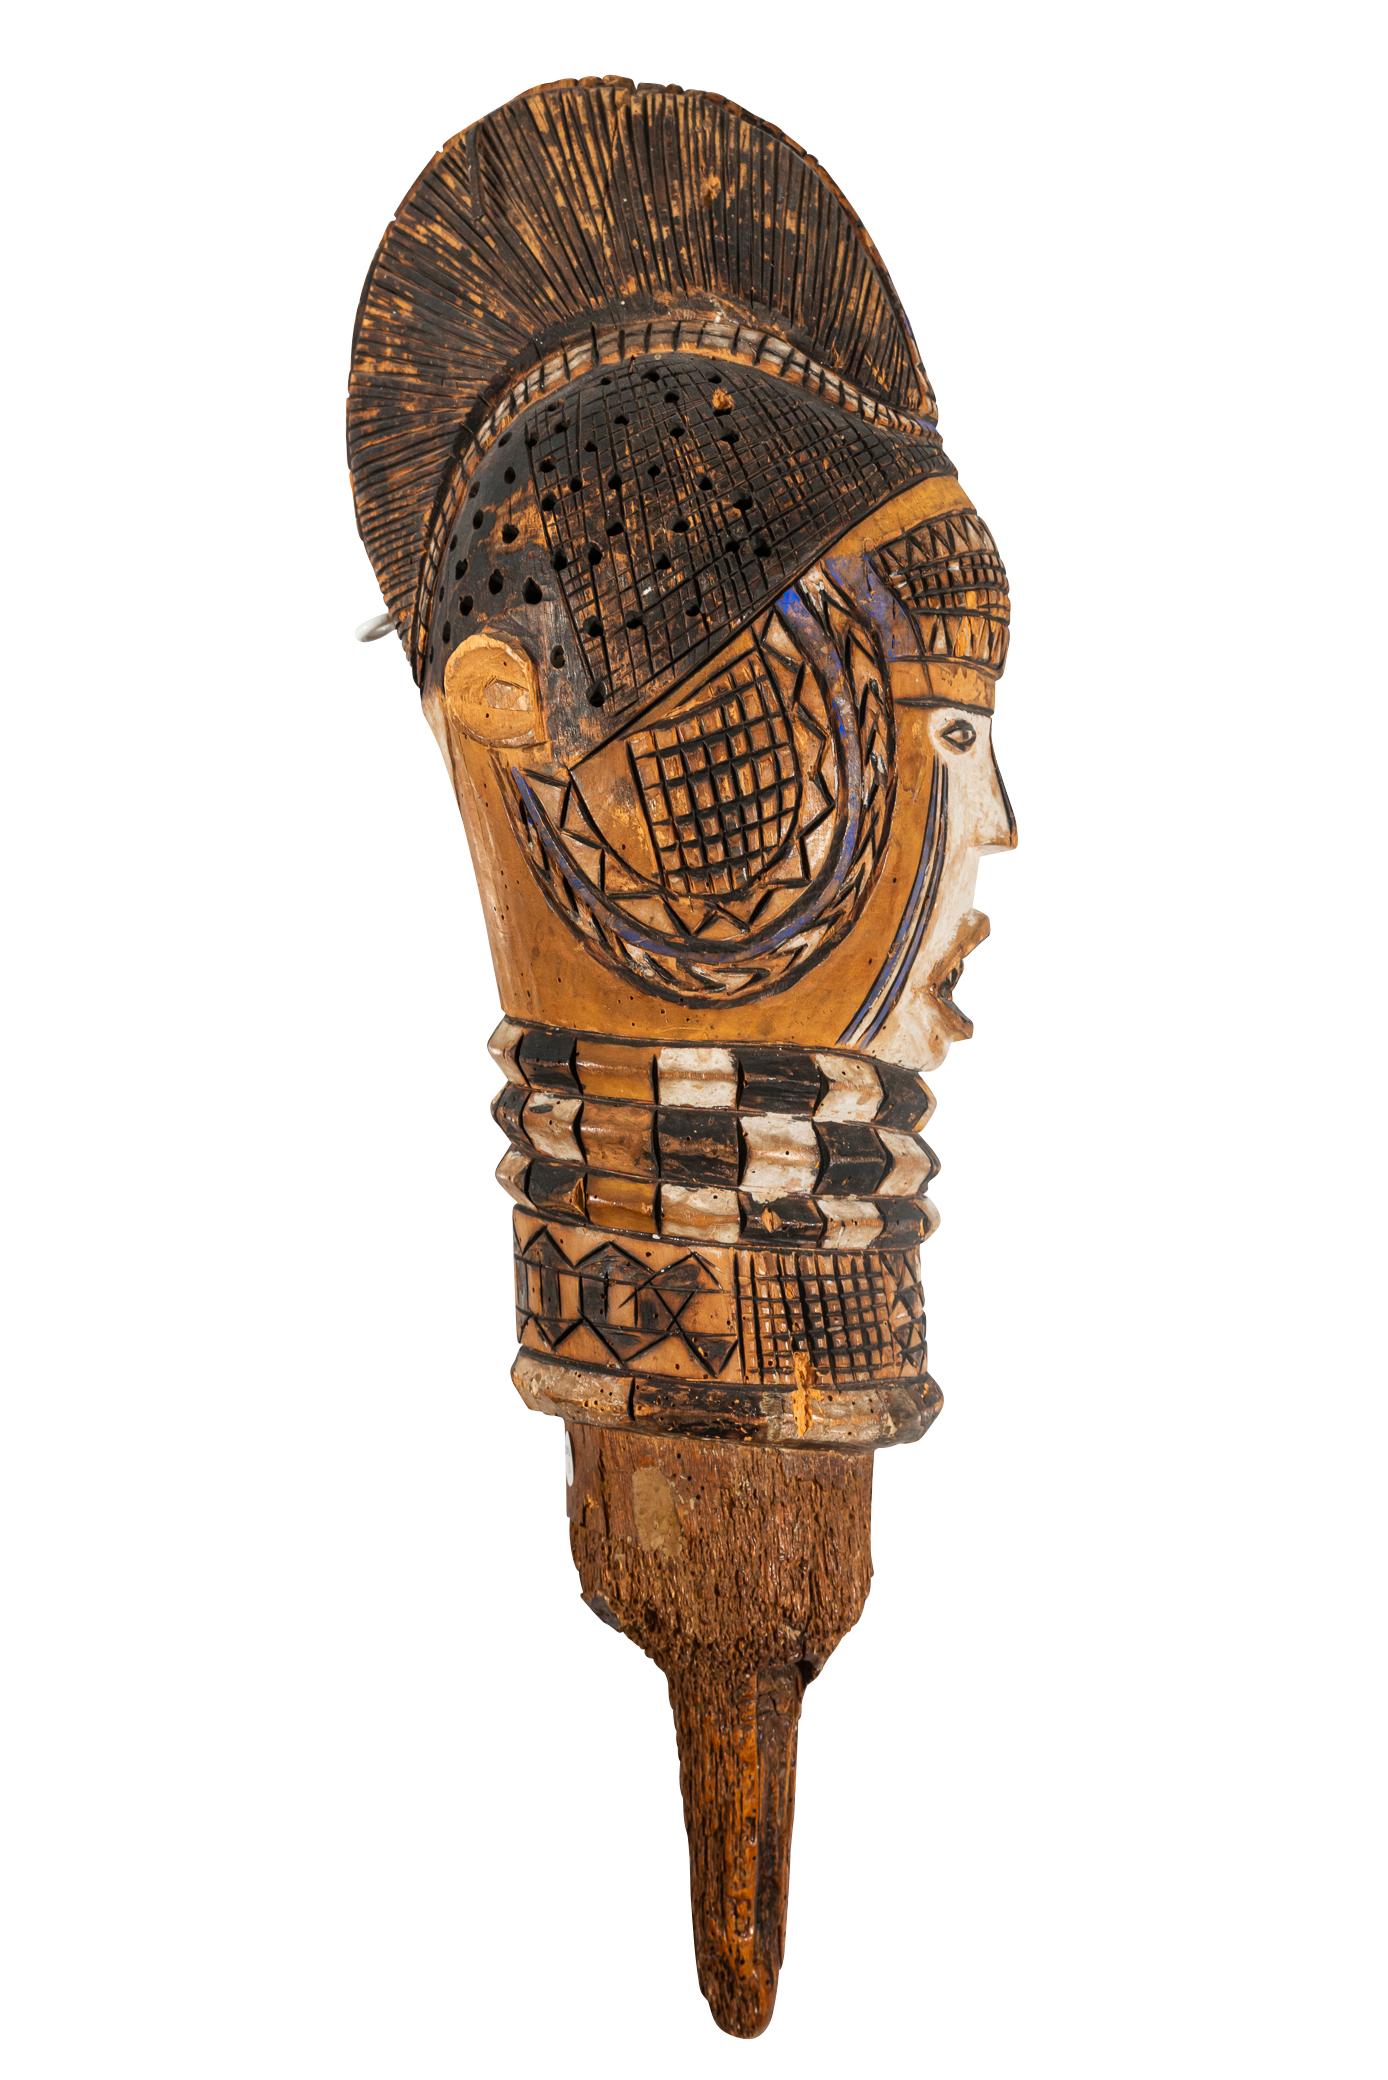 Kuyu puppet head, 
Wood and white, black and blue pigments,
The cylindrical handle supporting a rounded head with almond-shaped eyes, the half-open mouth revealing a row of teeth, the neck with rows of geometric patterns, the bun hairstyle, the face